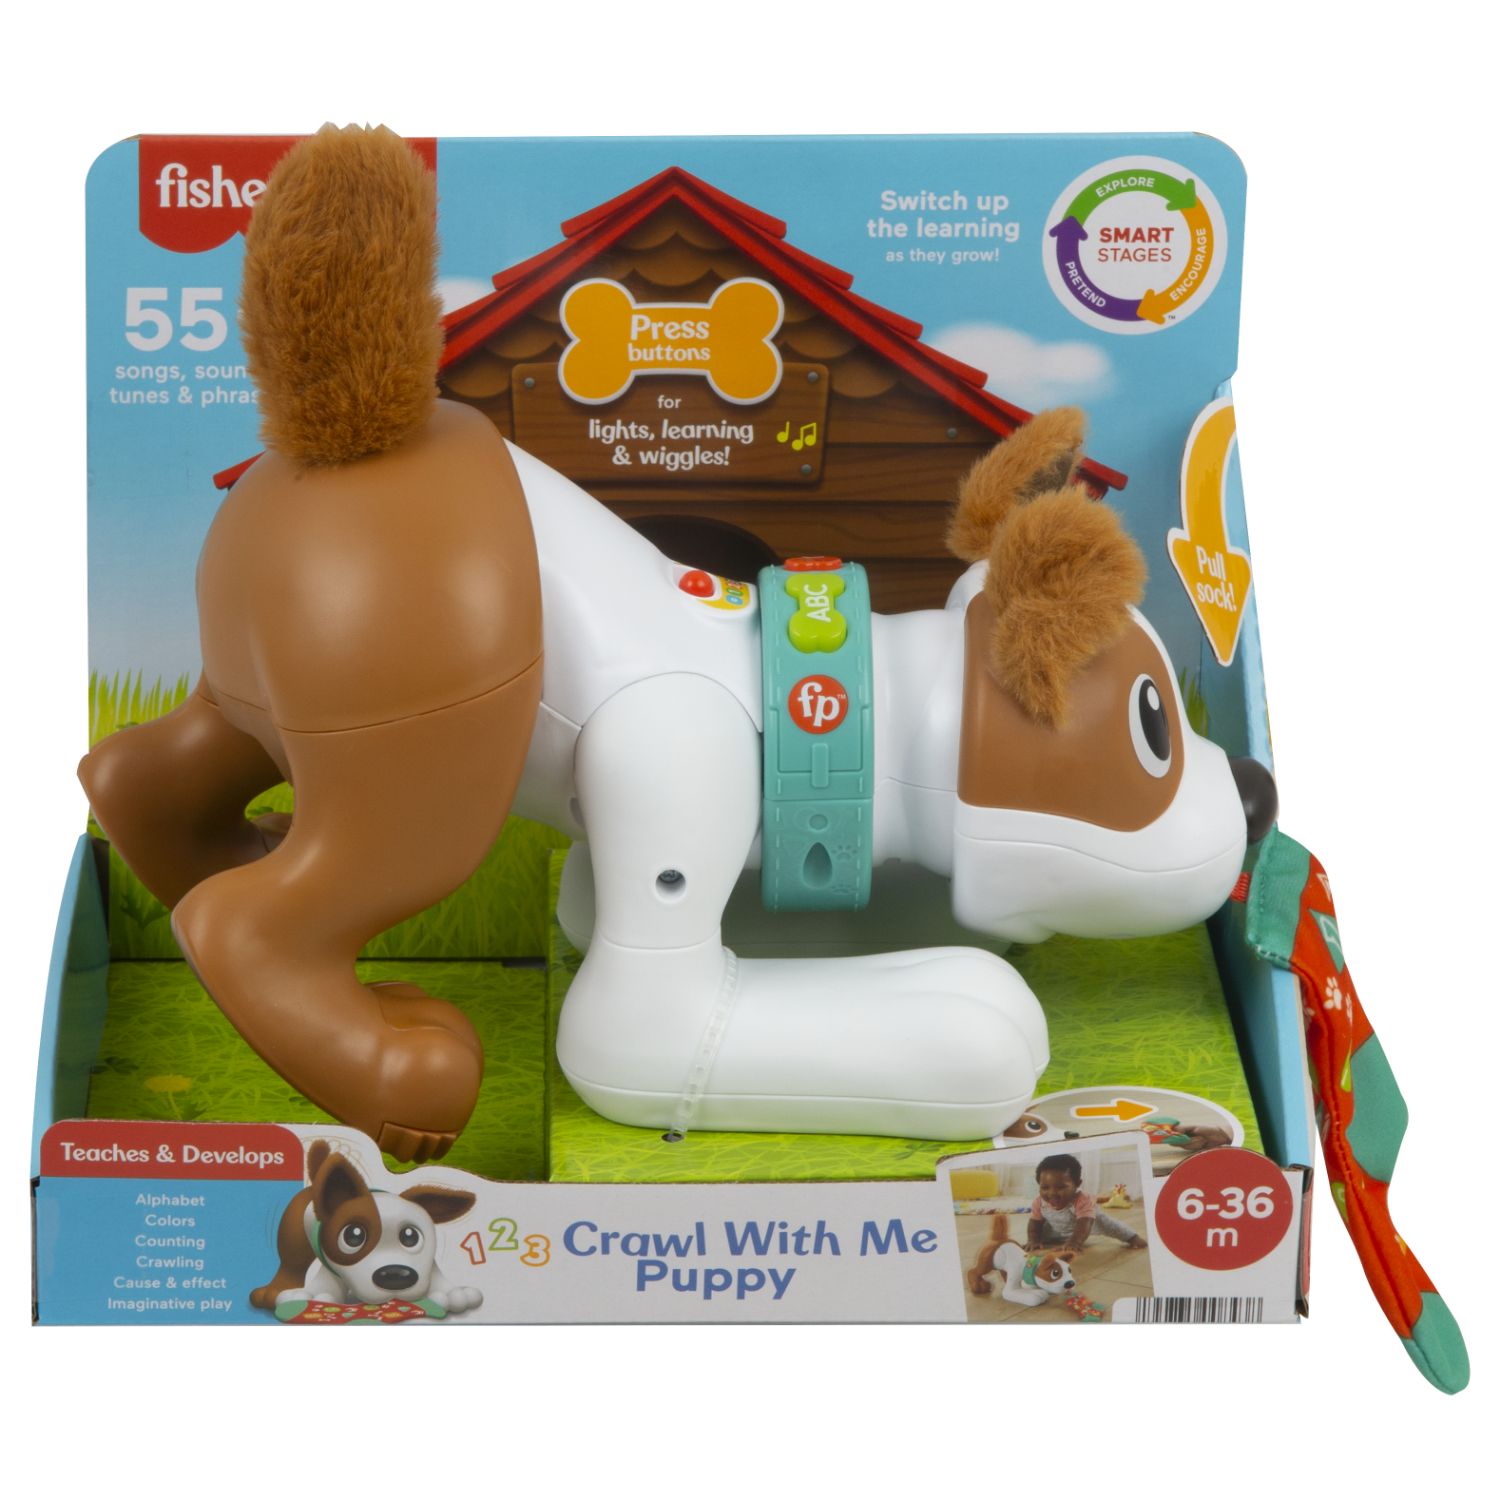 FISHER PRICE 123 CRAWL WITH ME PUPPY NL